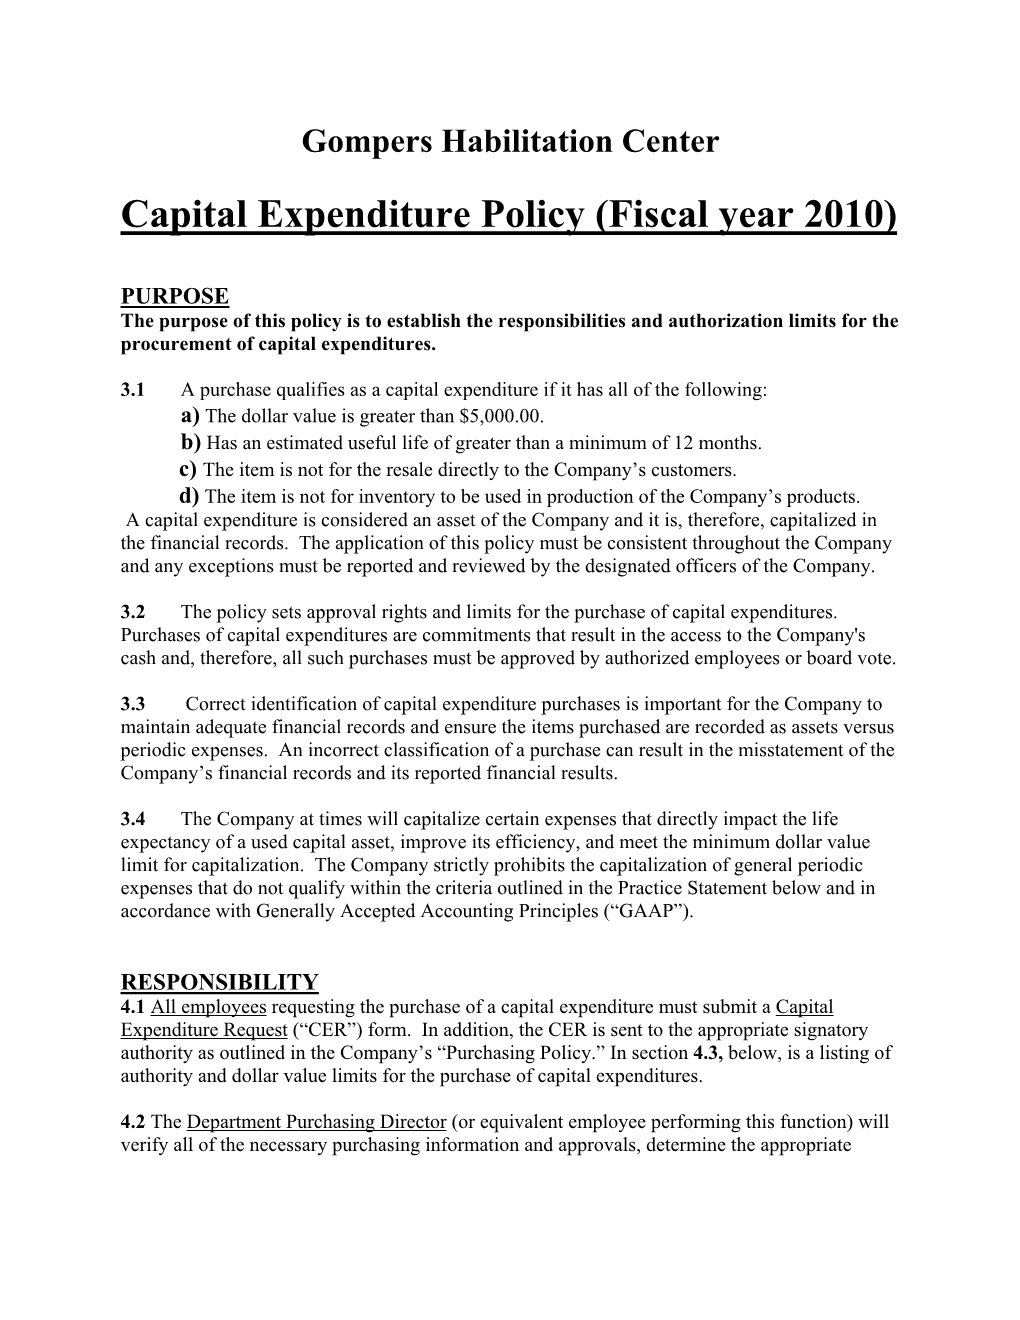 Capital Expenditure Policy (Fiscal Year 2010)